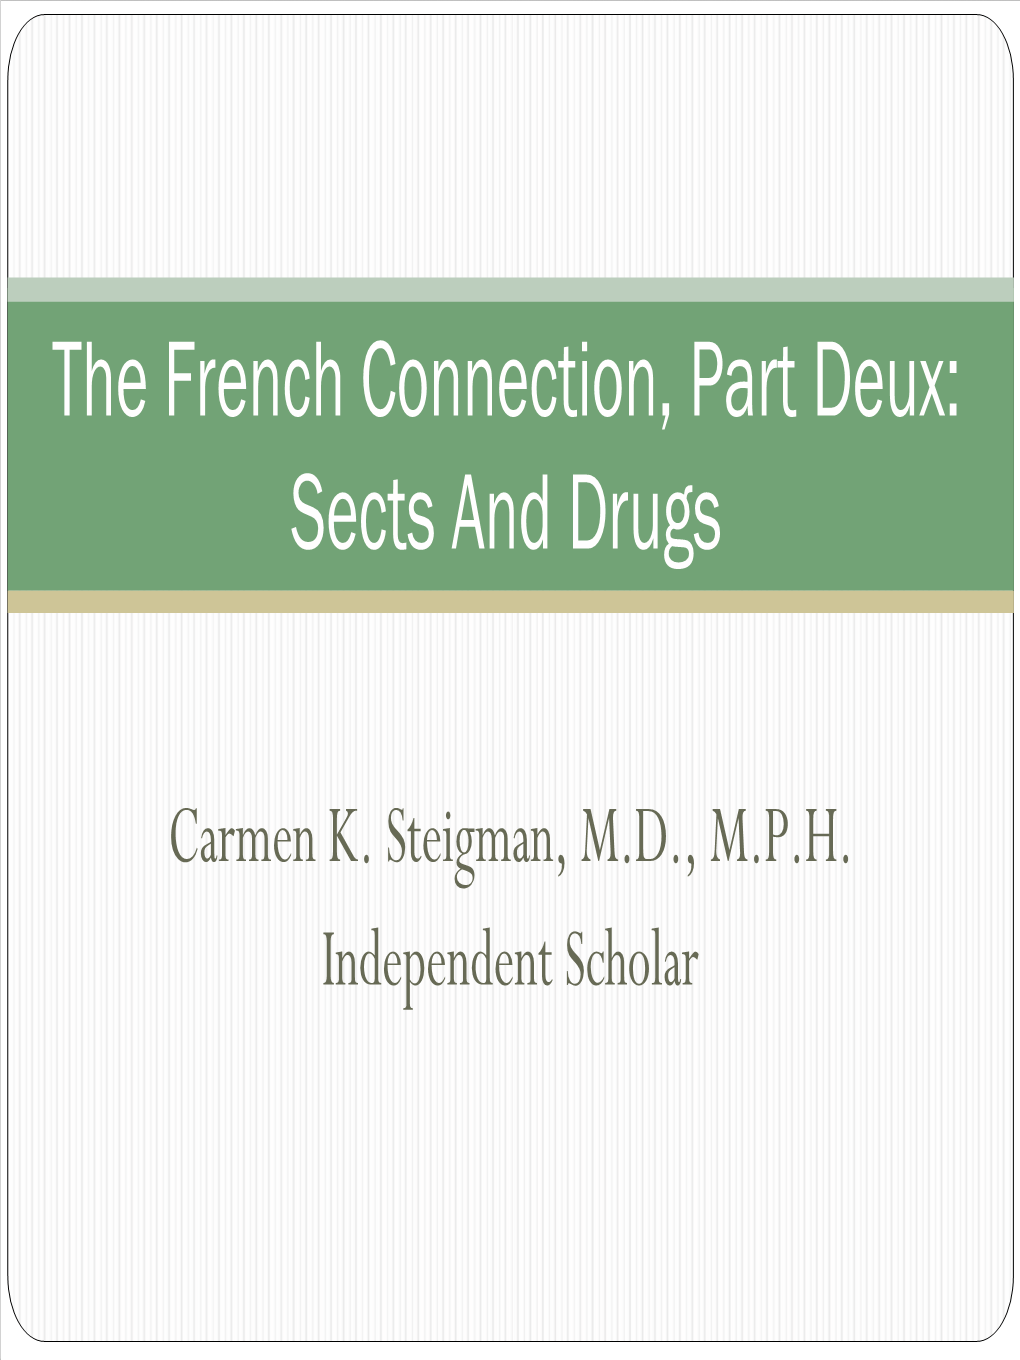 The French Connection, Part Deux: Sects and Drugs